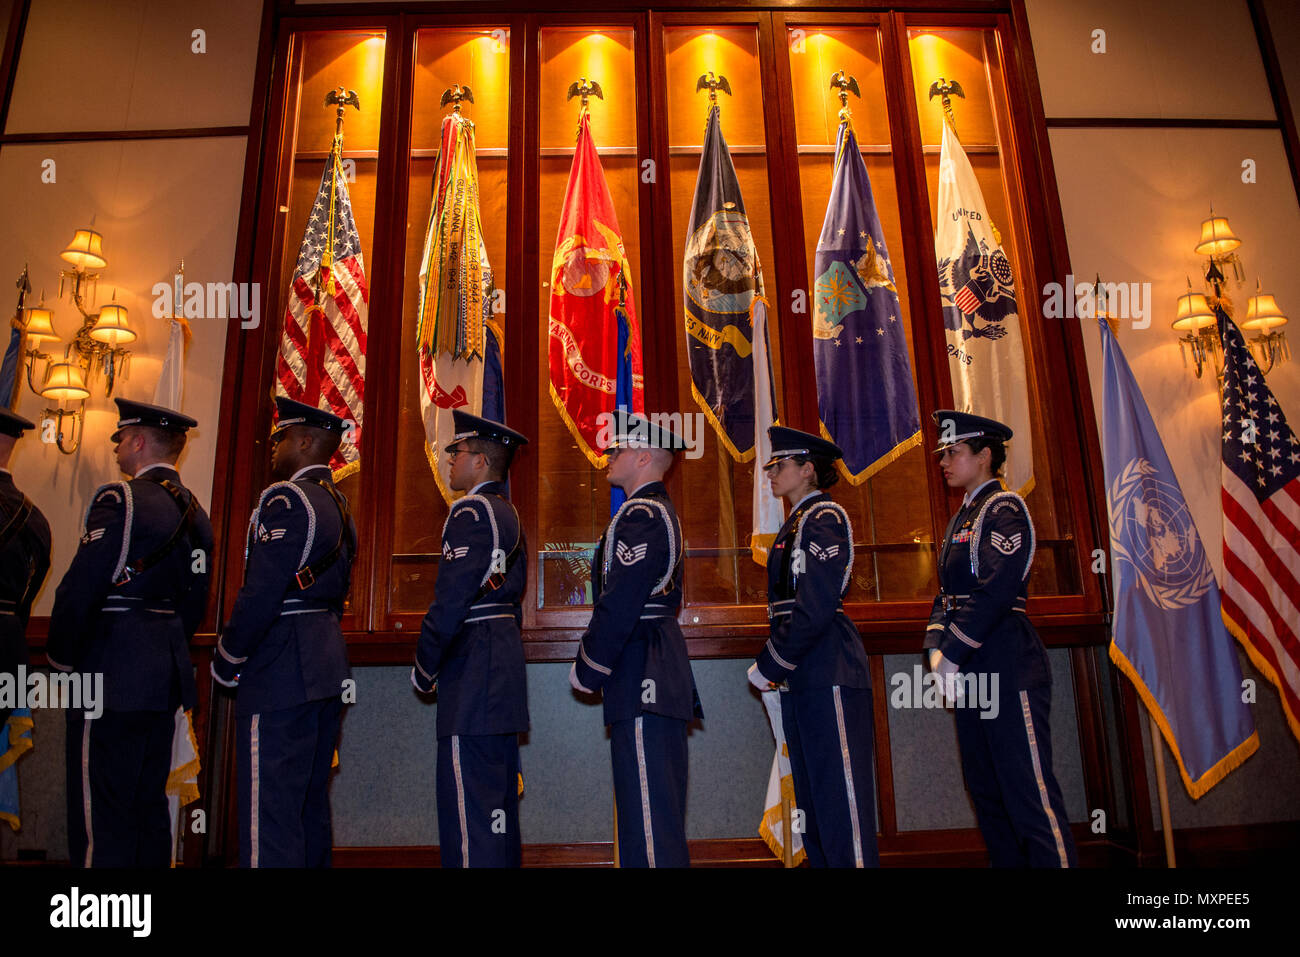 Members of the Yokota Air Base Honor Guard prepare to present the colors during the United Nations Day 71st Anniversary Celebration in Tokyo, Japan, Nov. 21, 2016. United Nations Day commemorates the anniversary of the United Nations Charter in 1945 and has been celebrated as UN Day since 1948. (U.S. Air Force photo by Airman 1st Class Donald Hudson/Released) Stock Photo